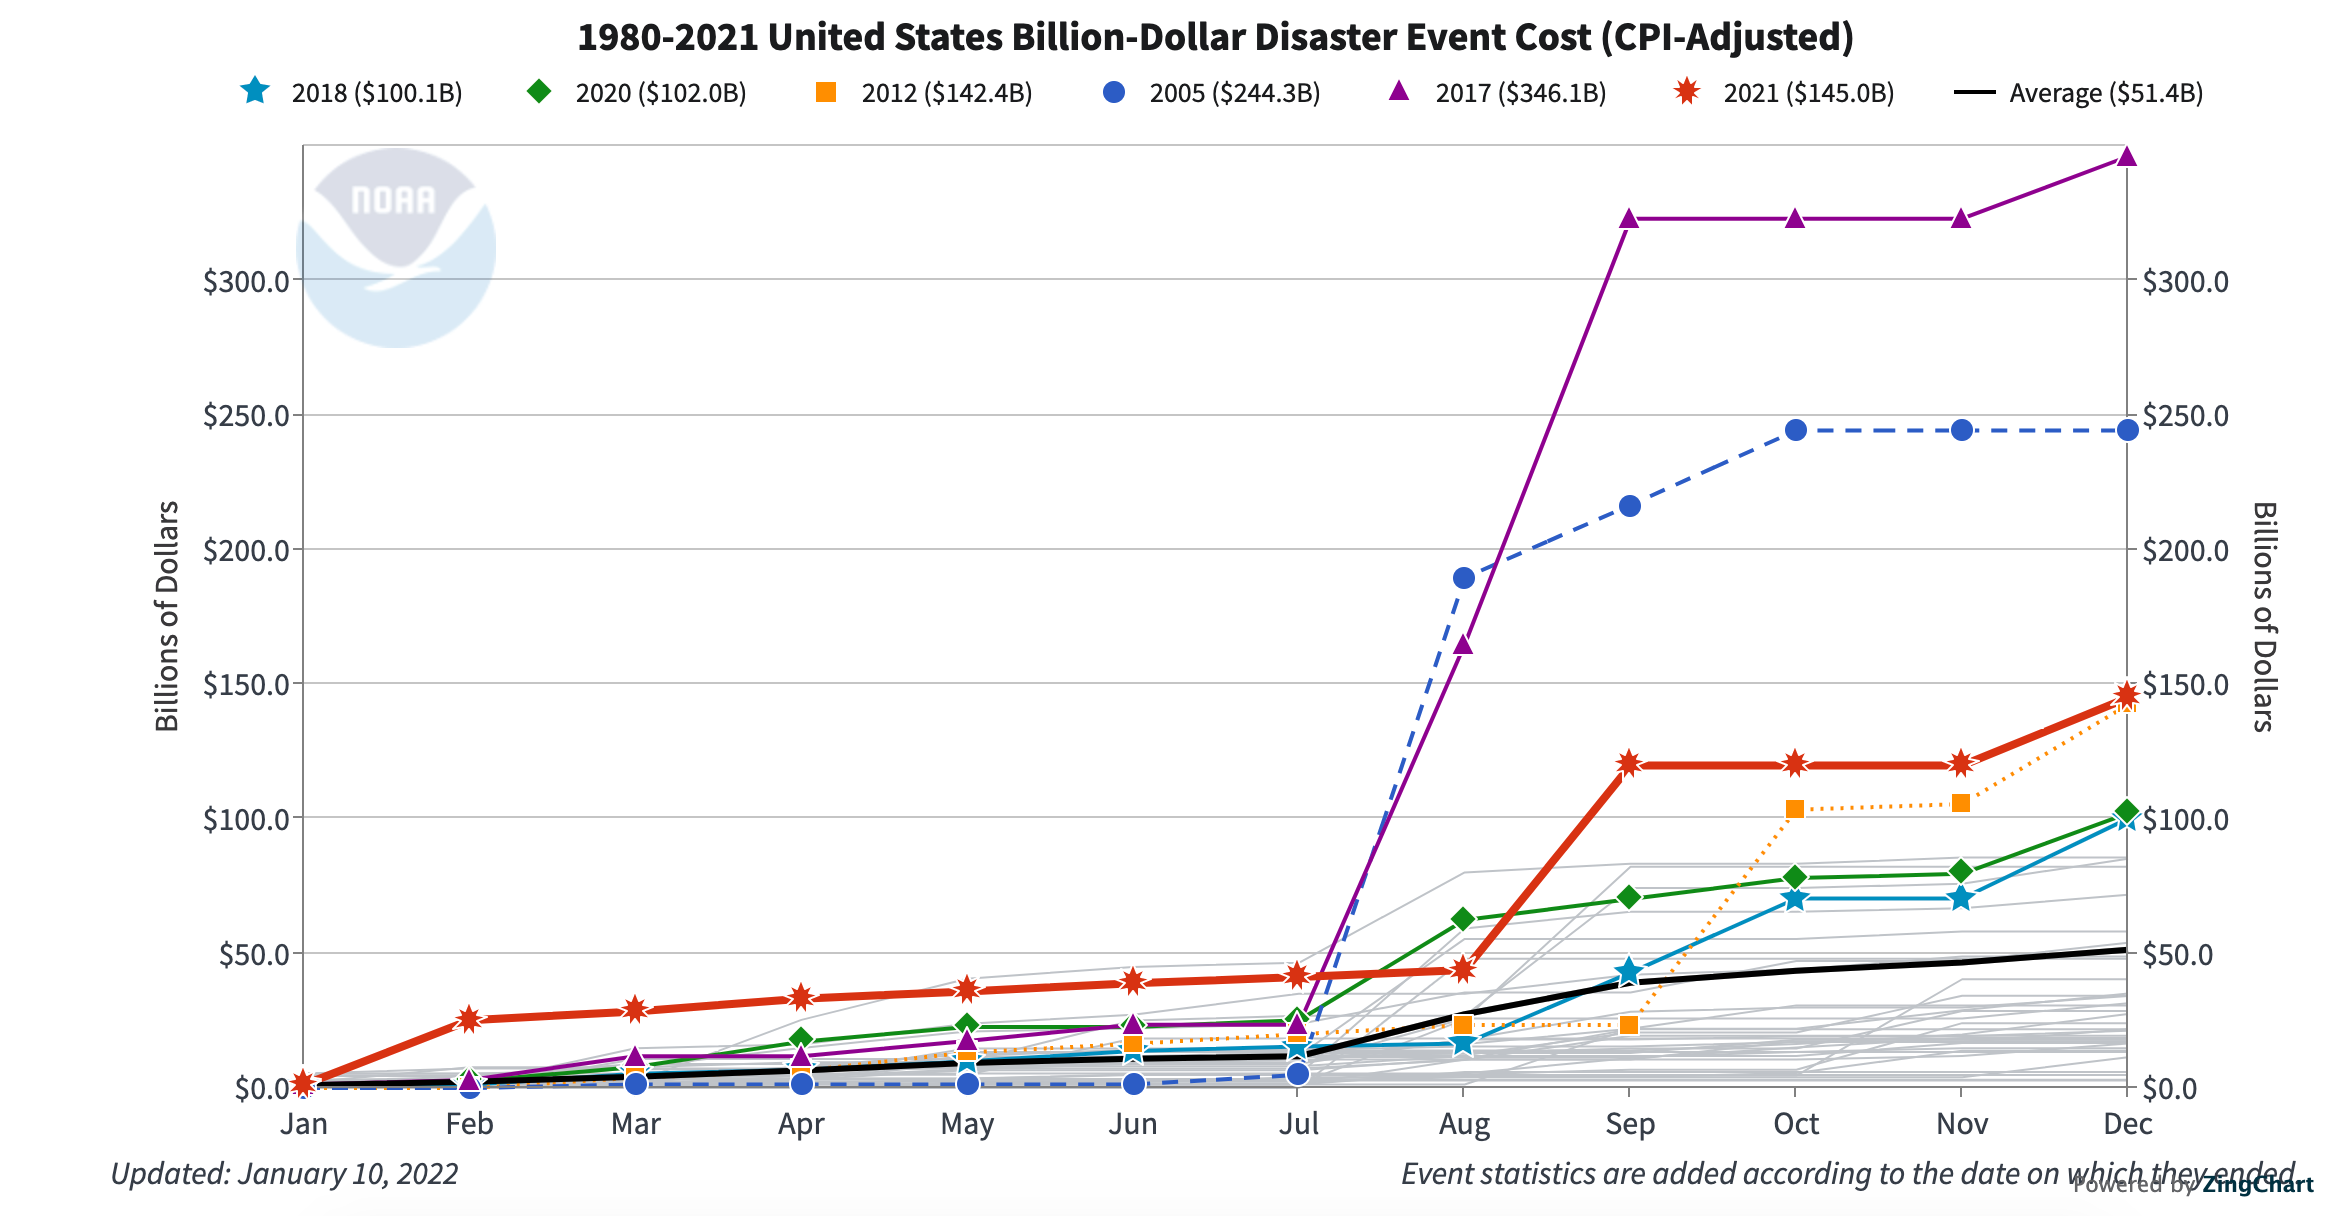 Plot of the rising cost of disasters in the US from 1980 to 2021